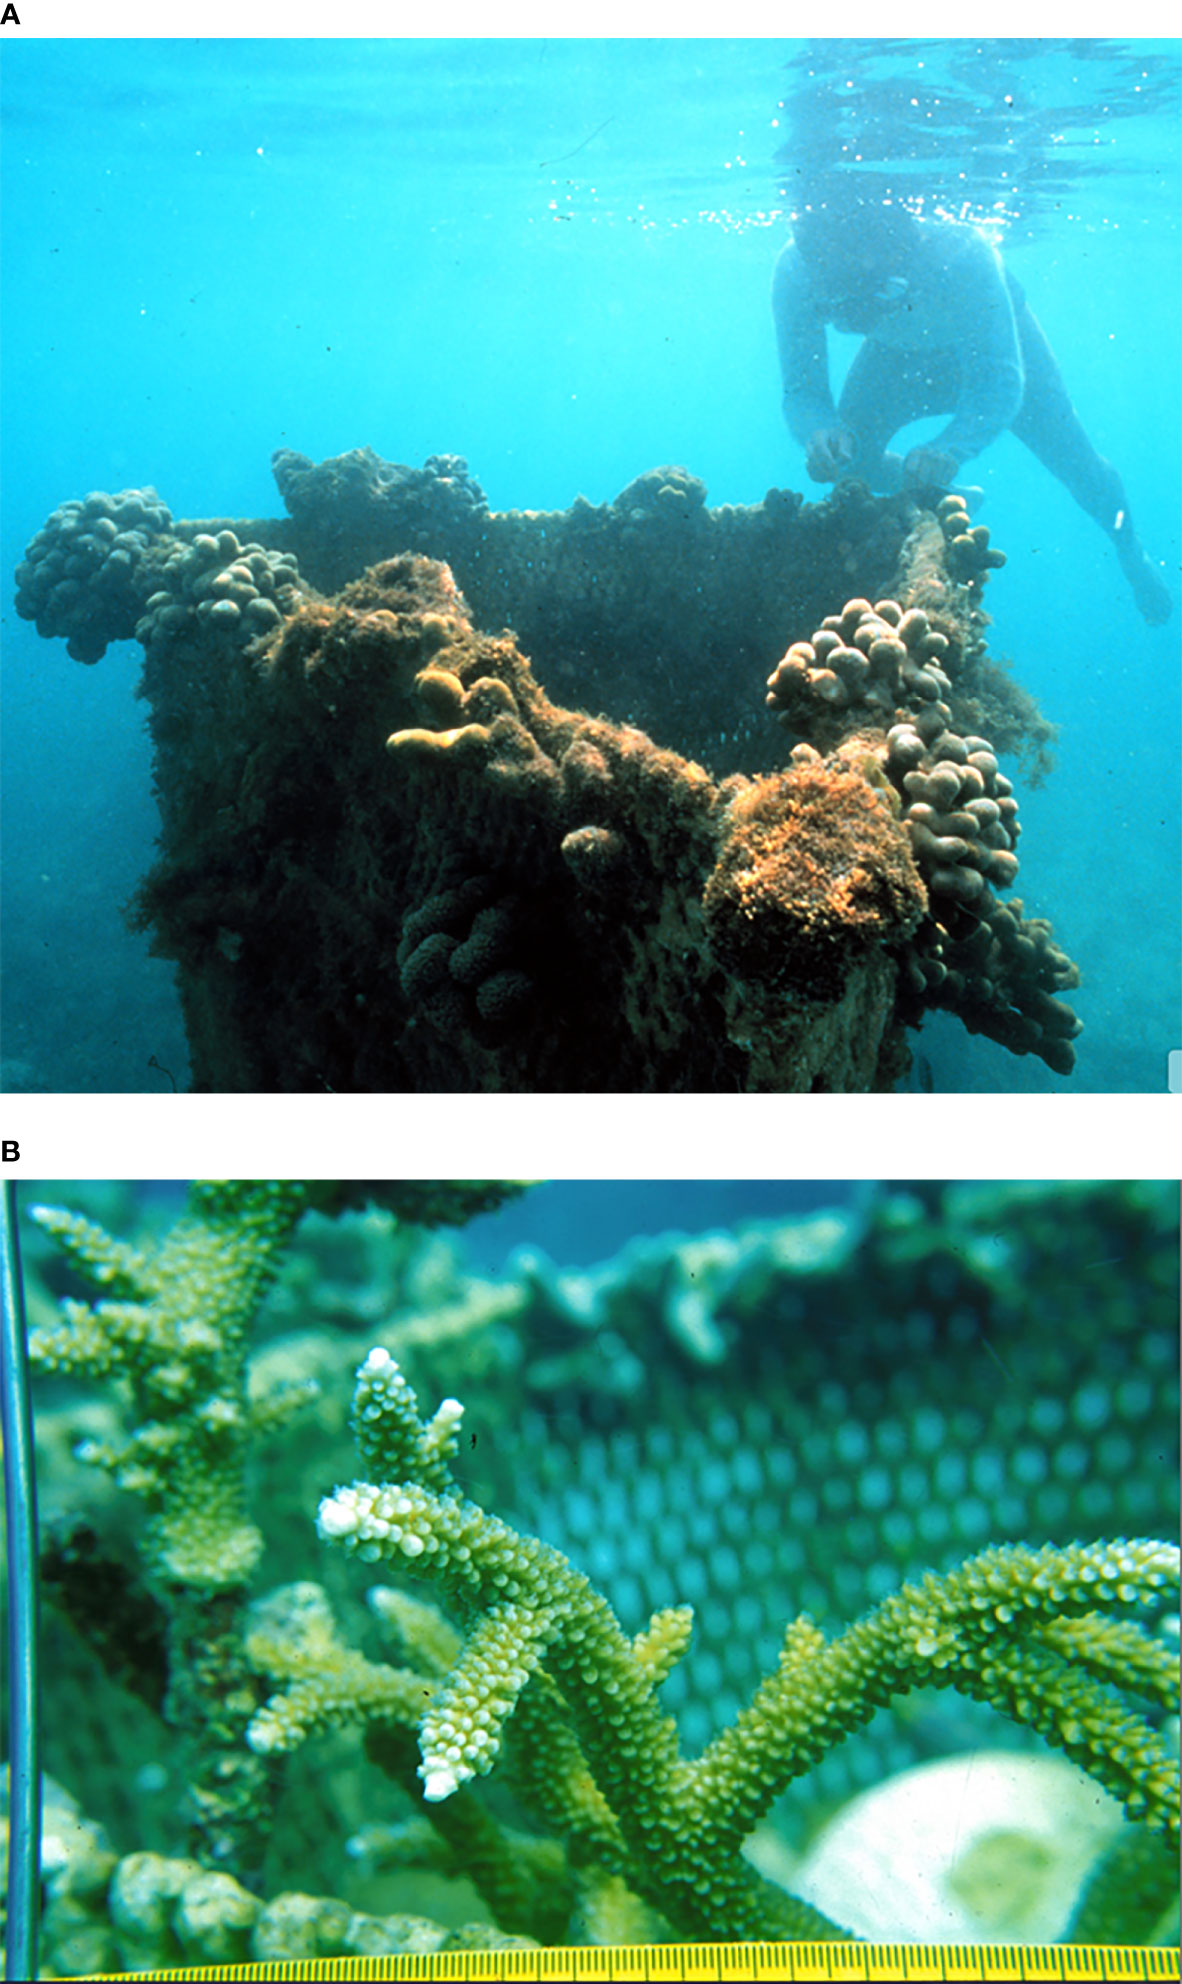 Restoring coral reefs benefits entire ecosystems and economies •